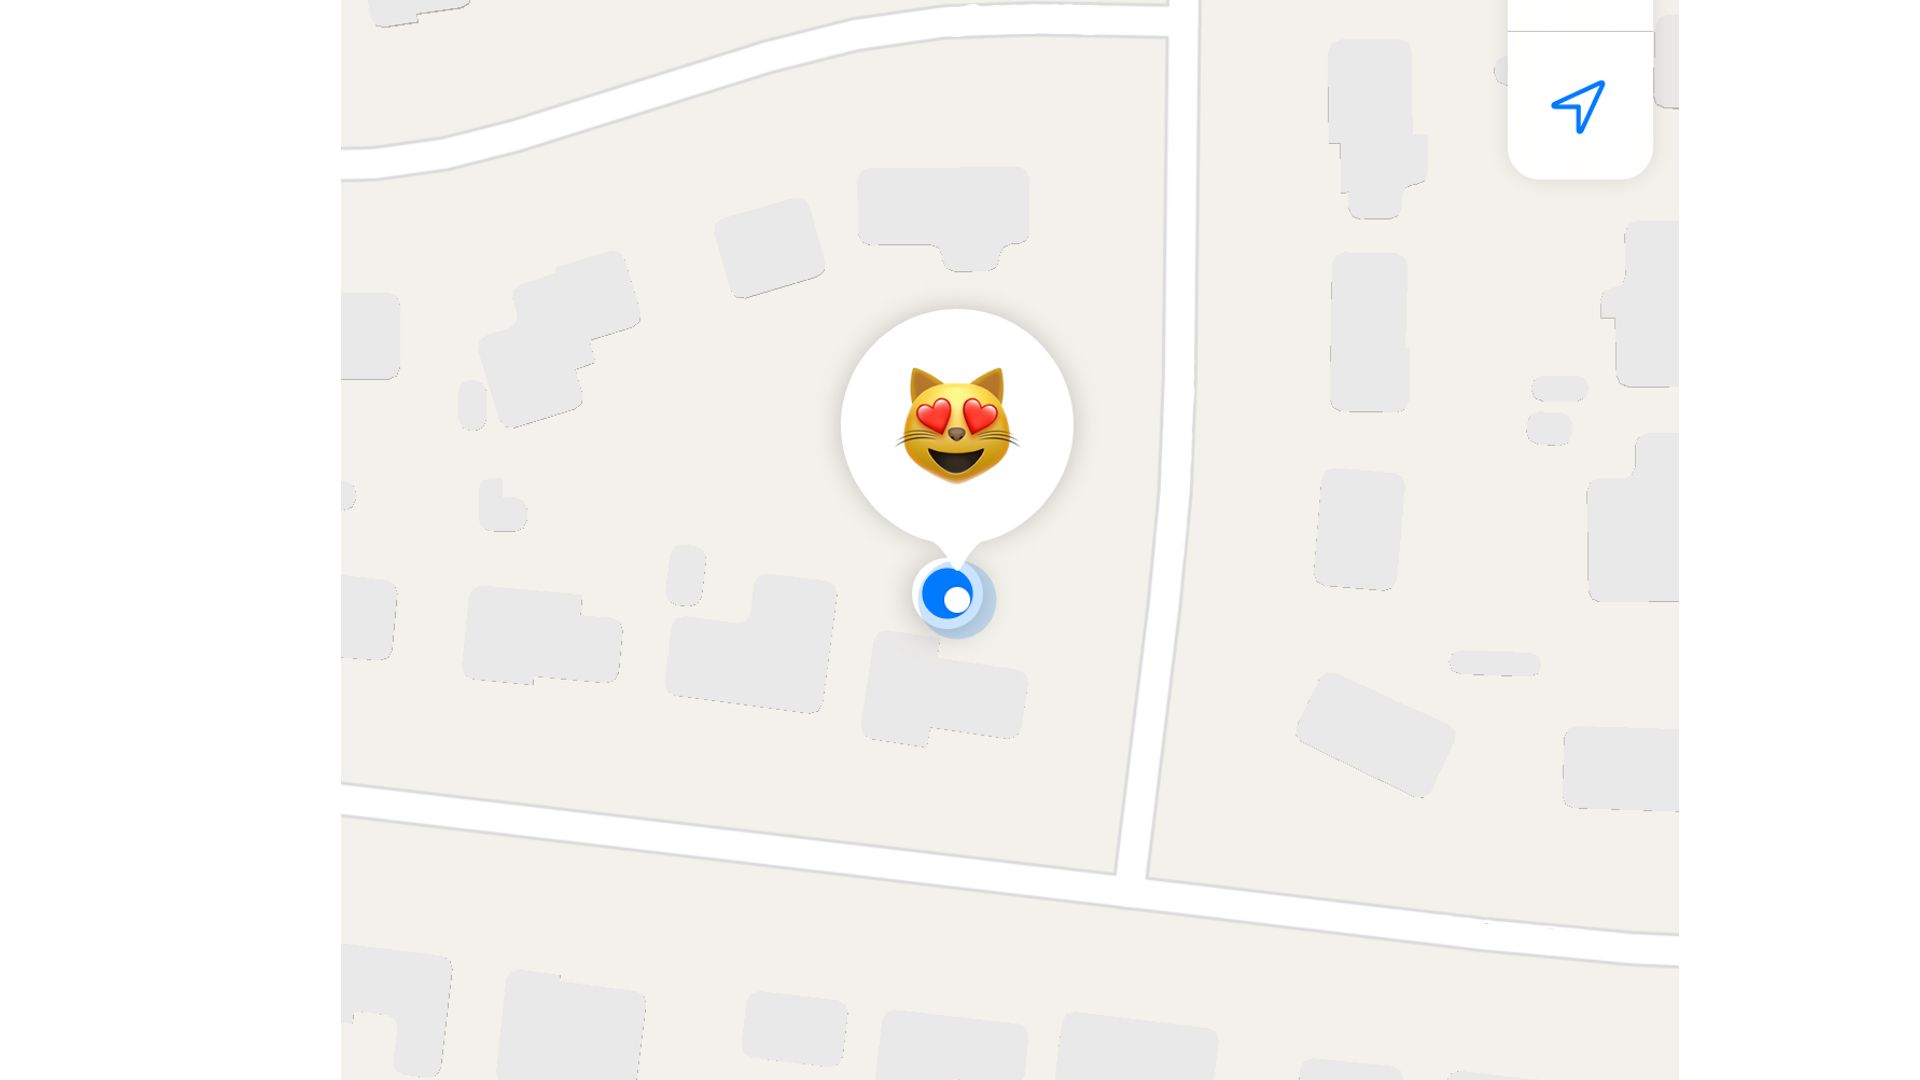 The Find My app showing the location of a cat in the back yard of a home on a map of the neighborhood.